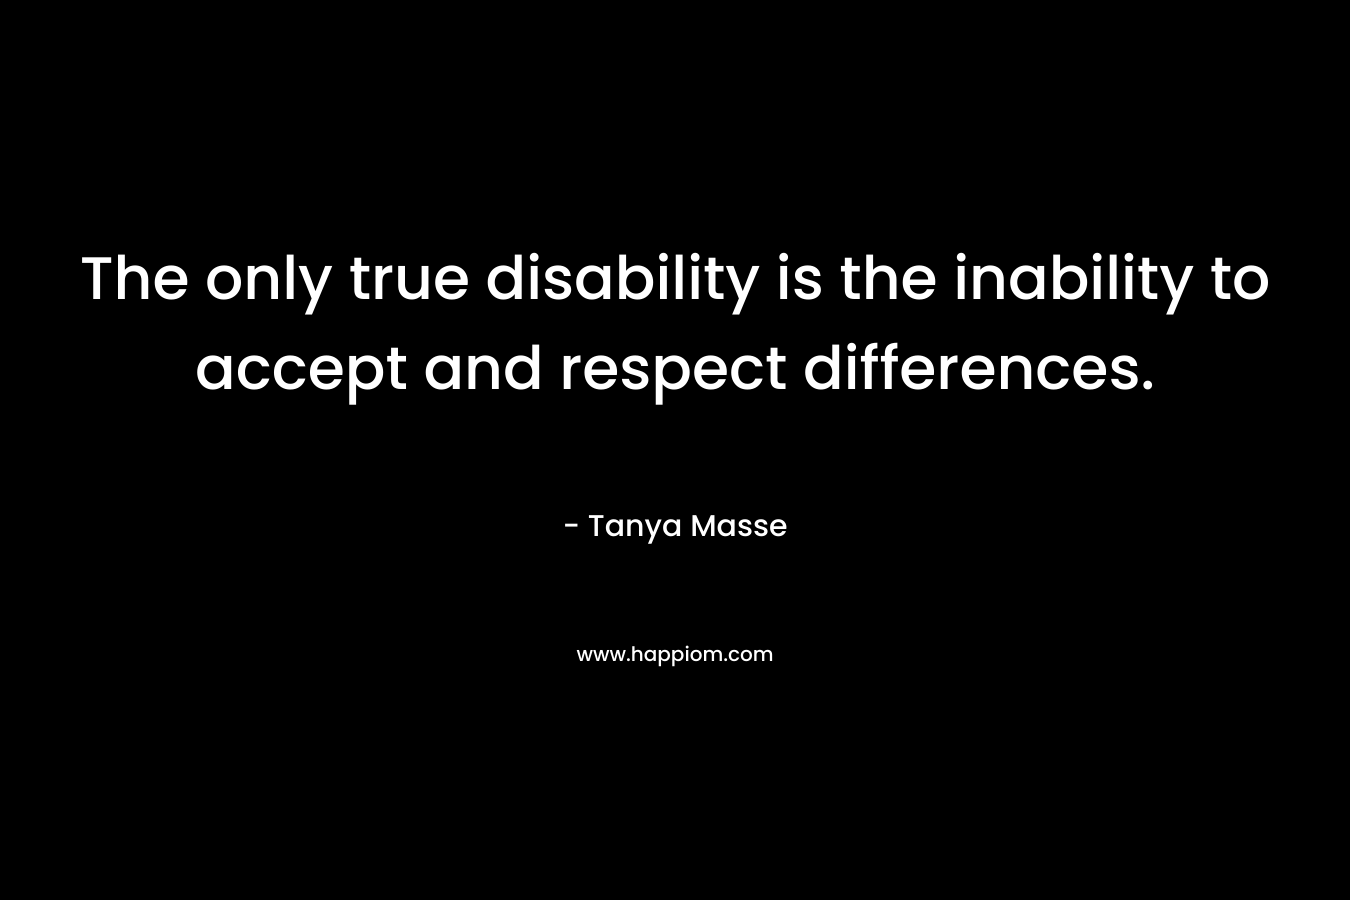 The only true disability is the inability to accept and respect differences.